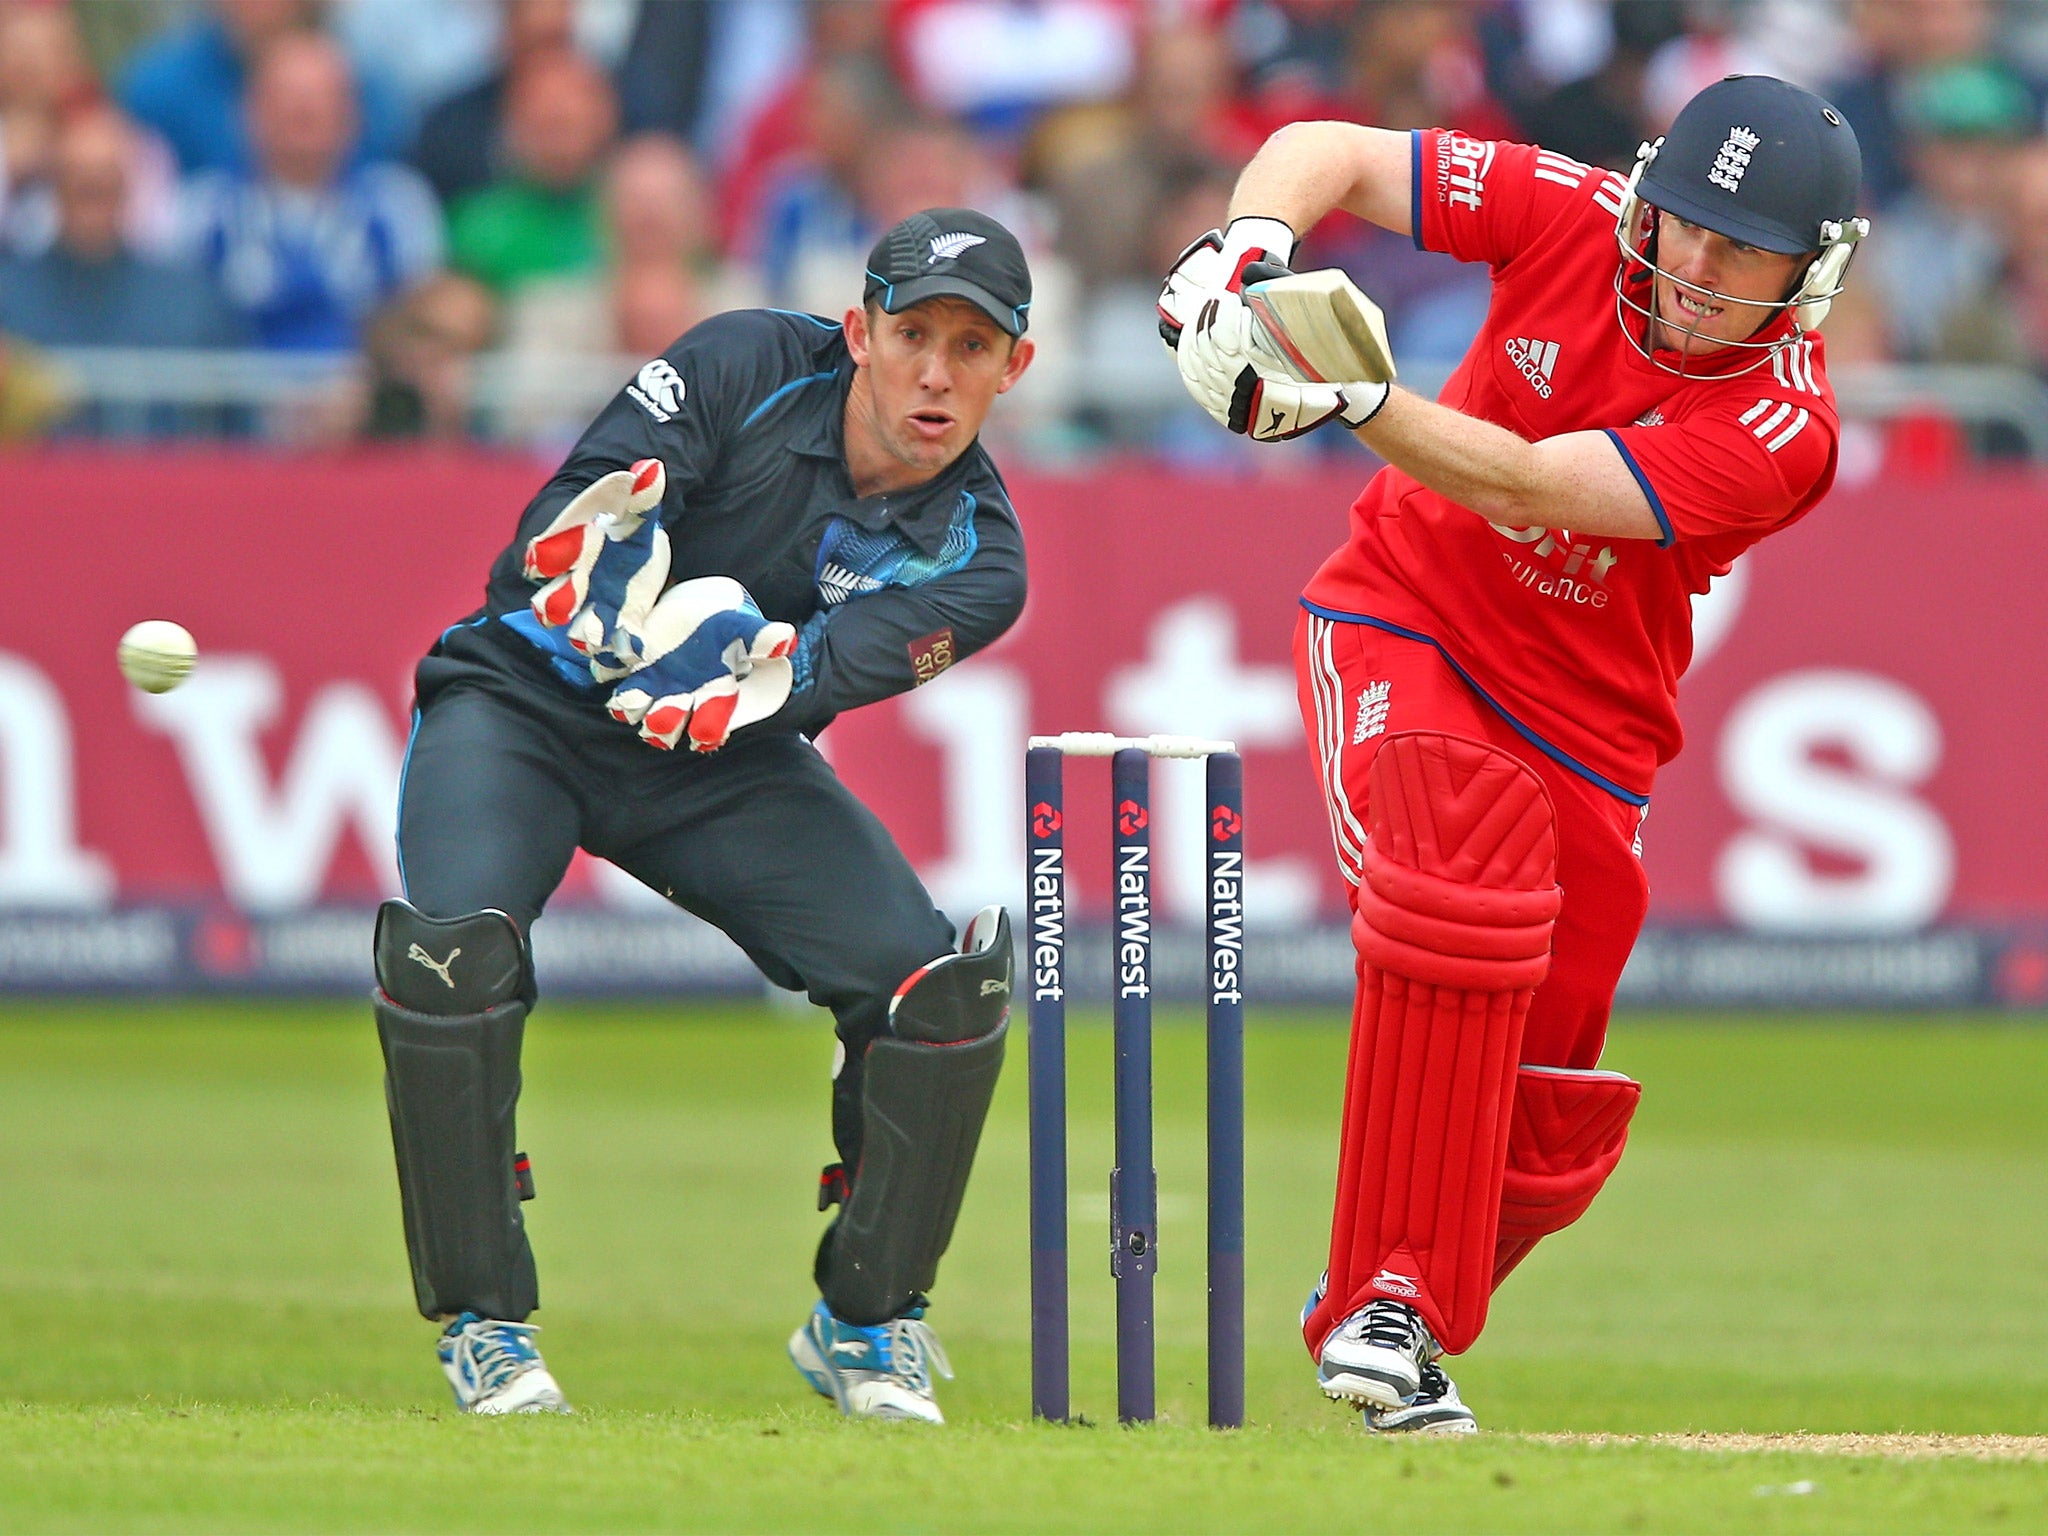 Eoin Morgan must provide impetus to England’s middle order